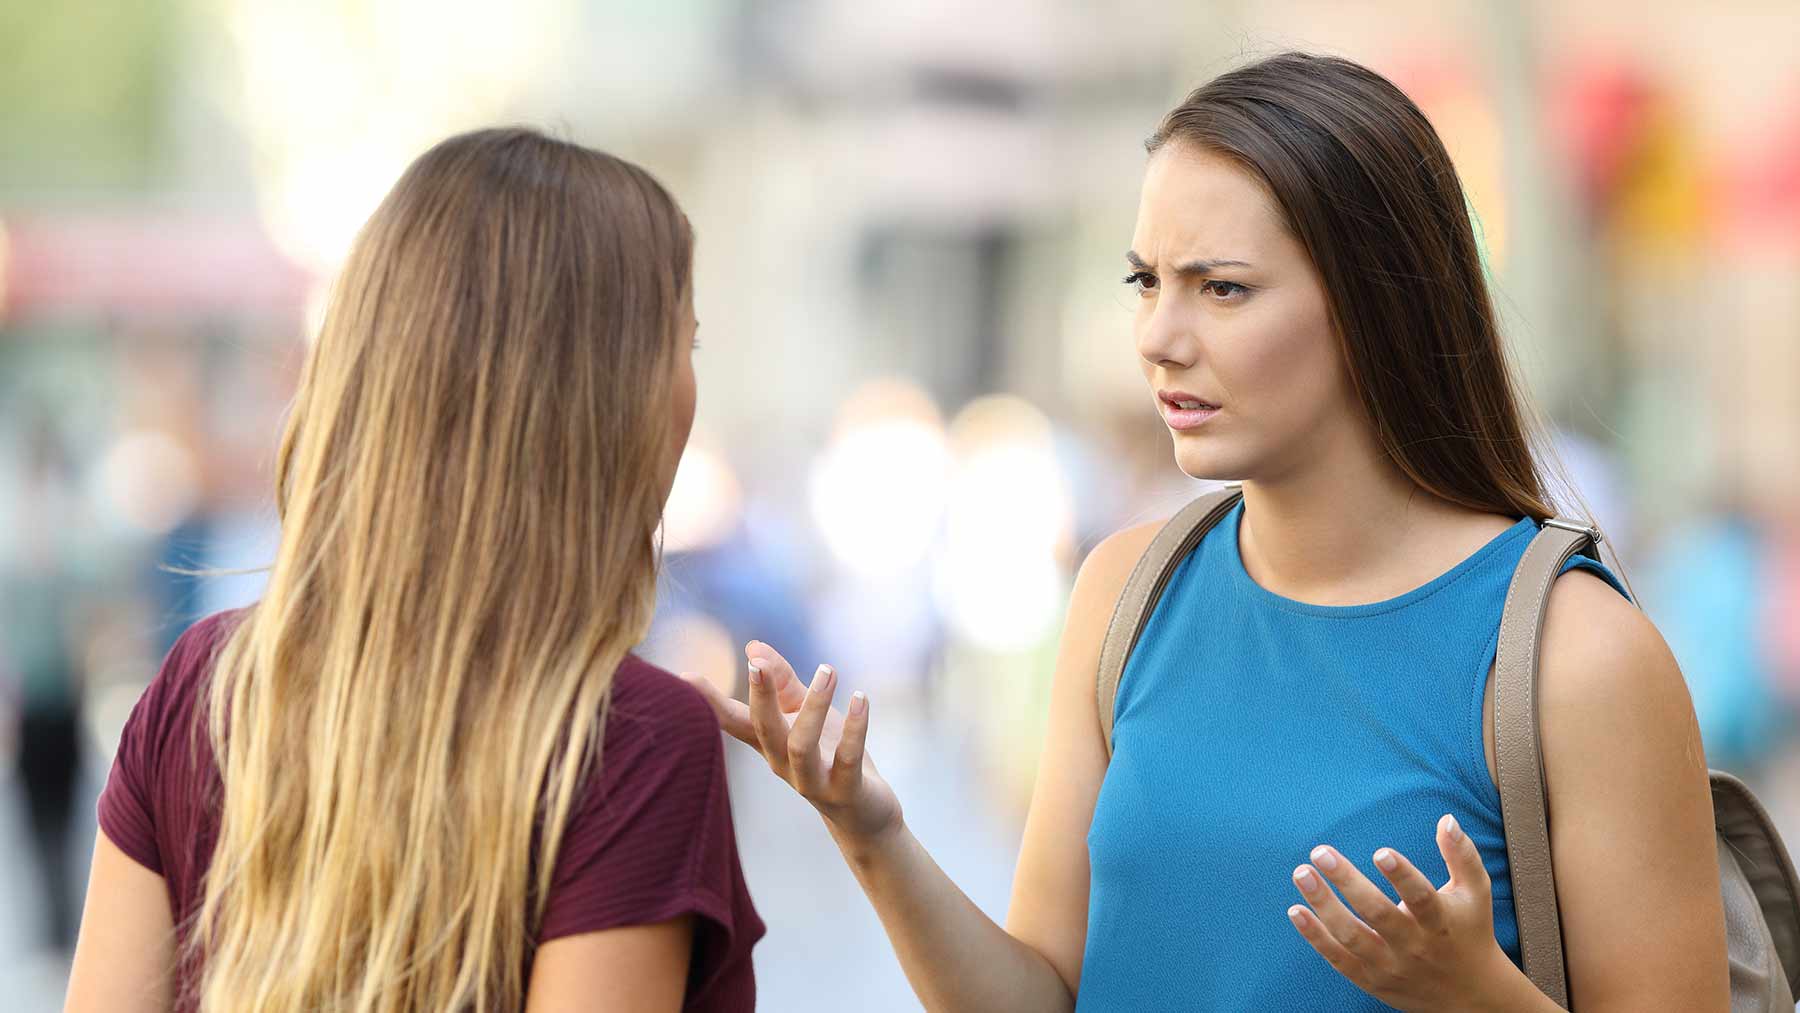 Two women talking and one looks concerned